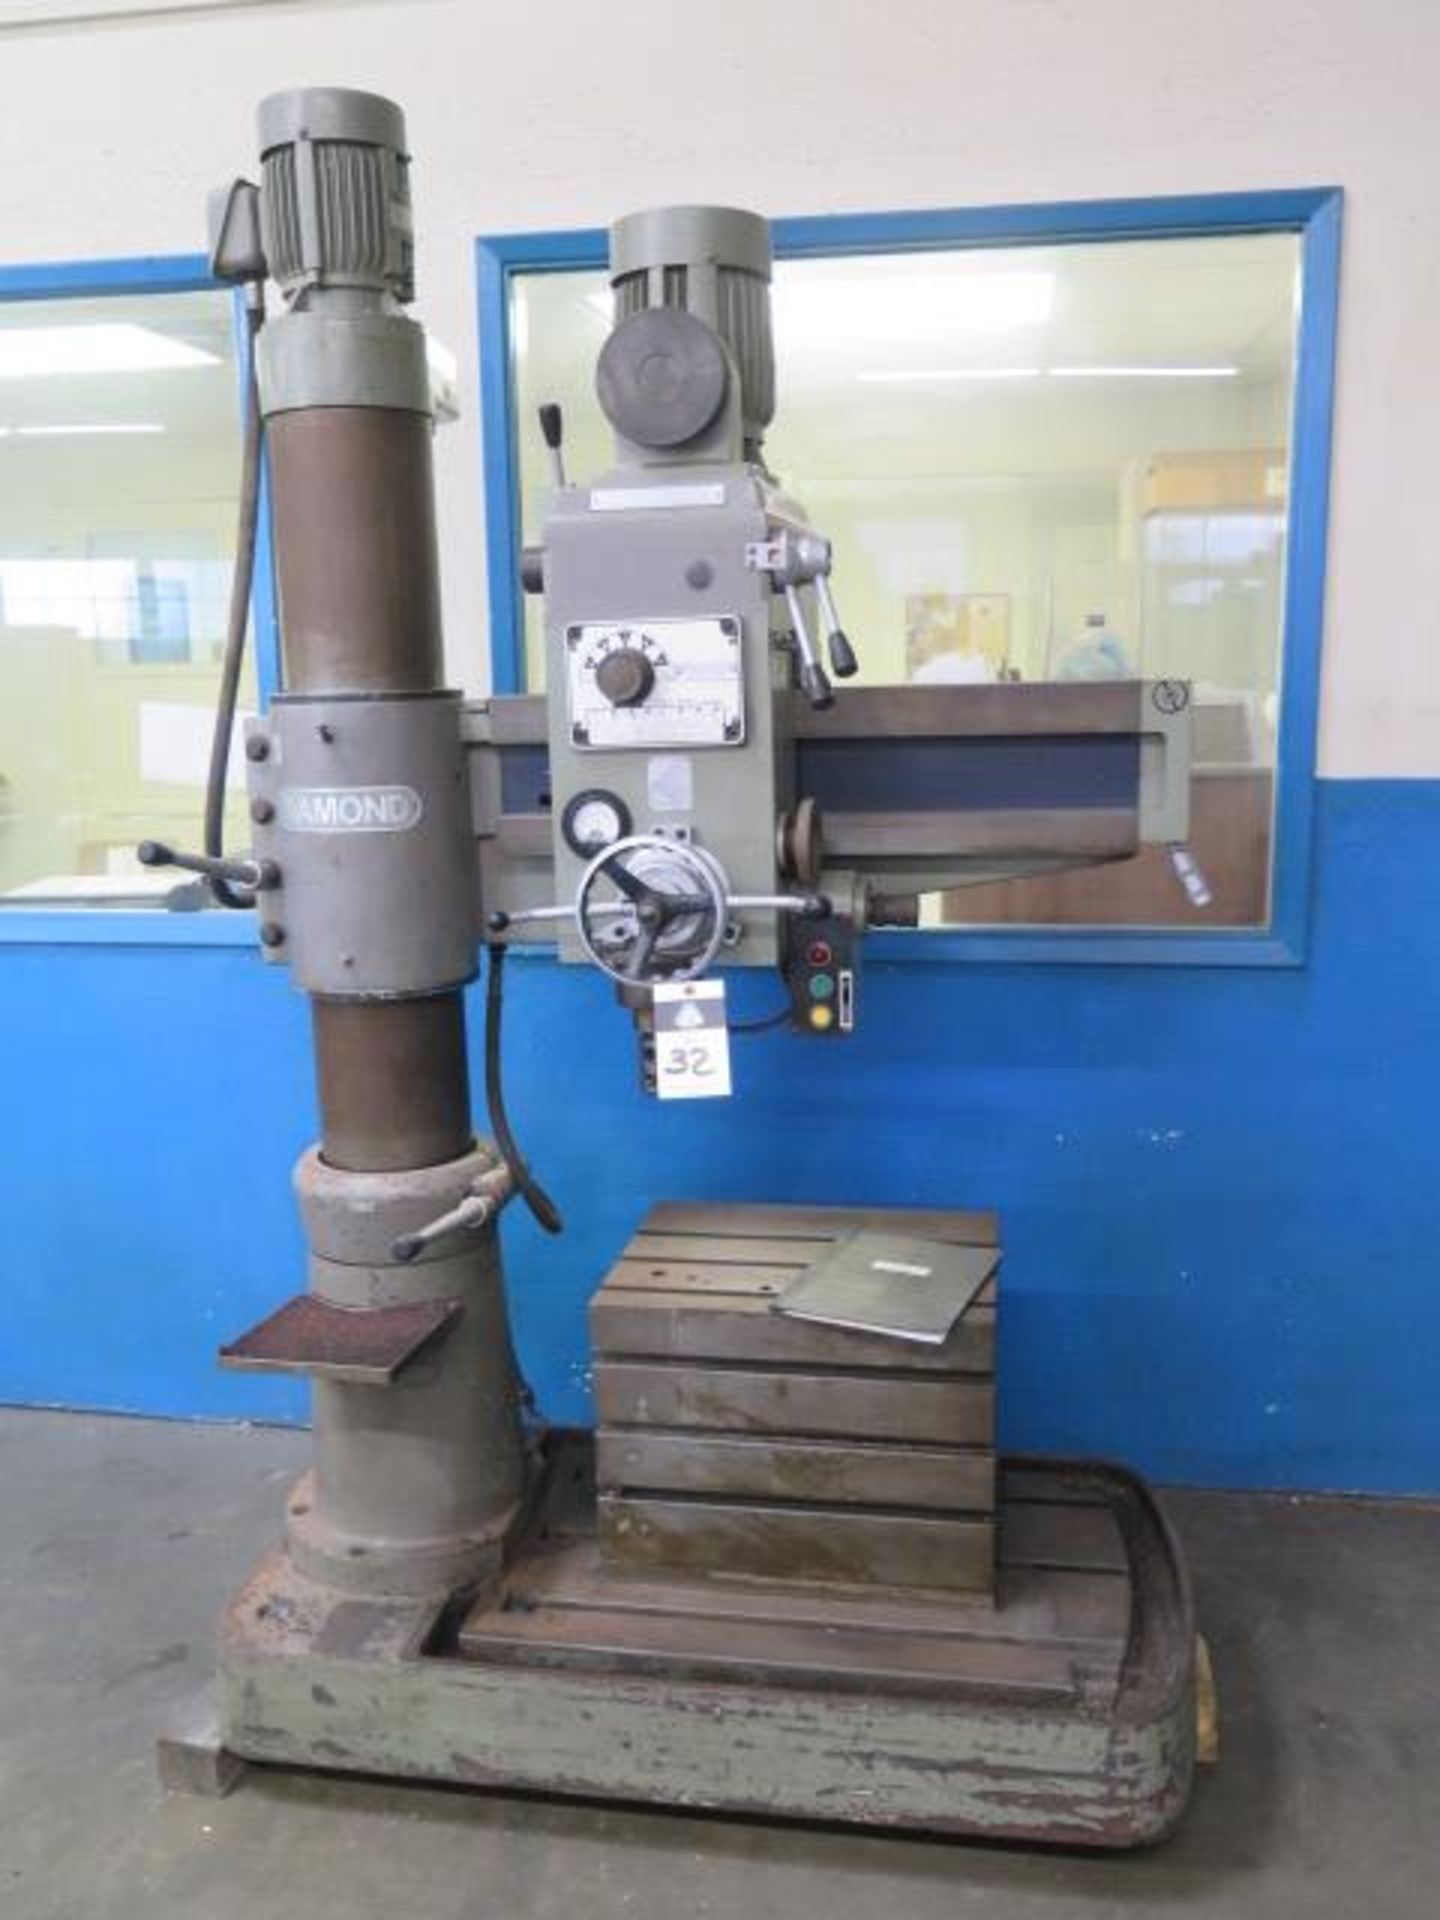 Diamond mdl. 800 “Hole Master” 8” Column x 20” Radial Arm Drill s/n 13322 w/ 88-1500 RPM, SOLD AS IS